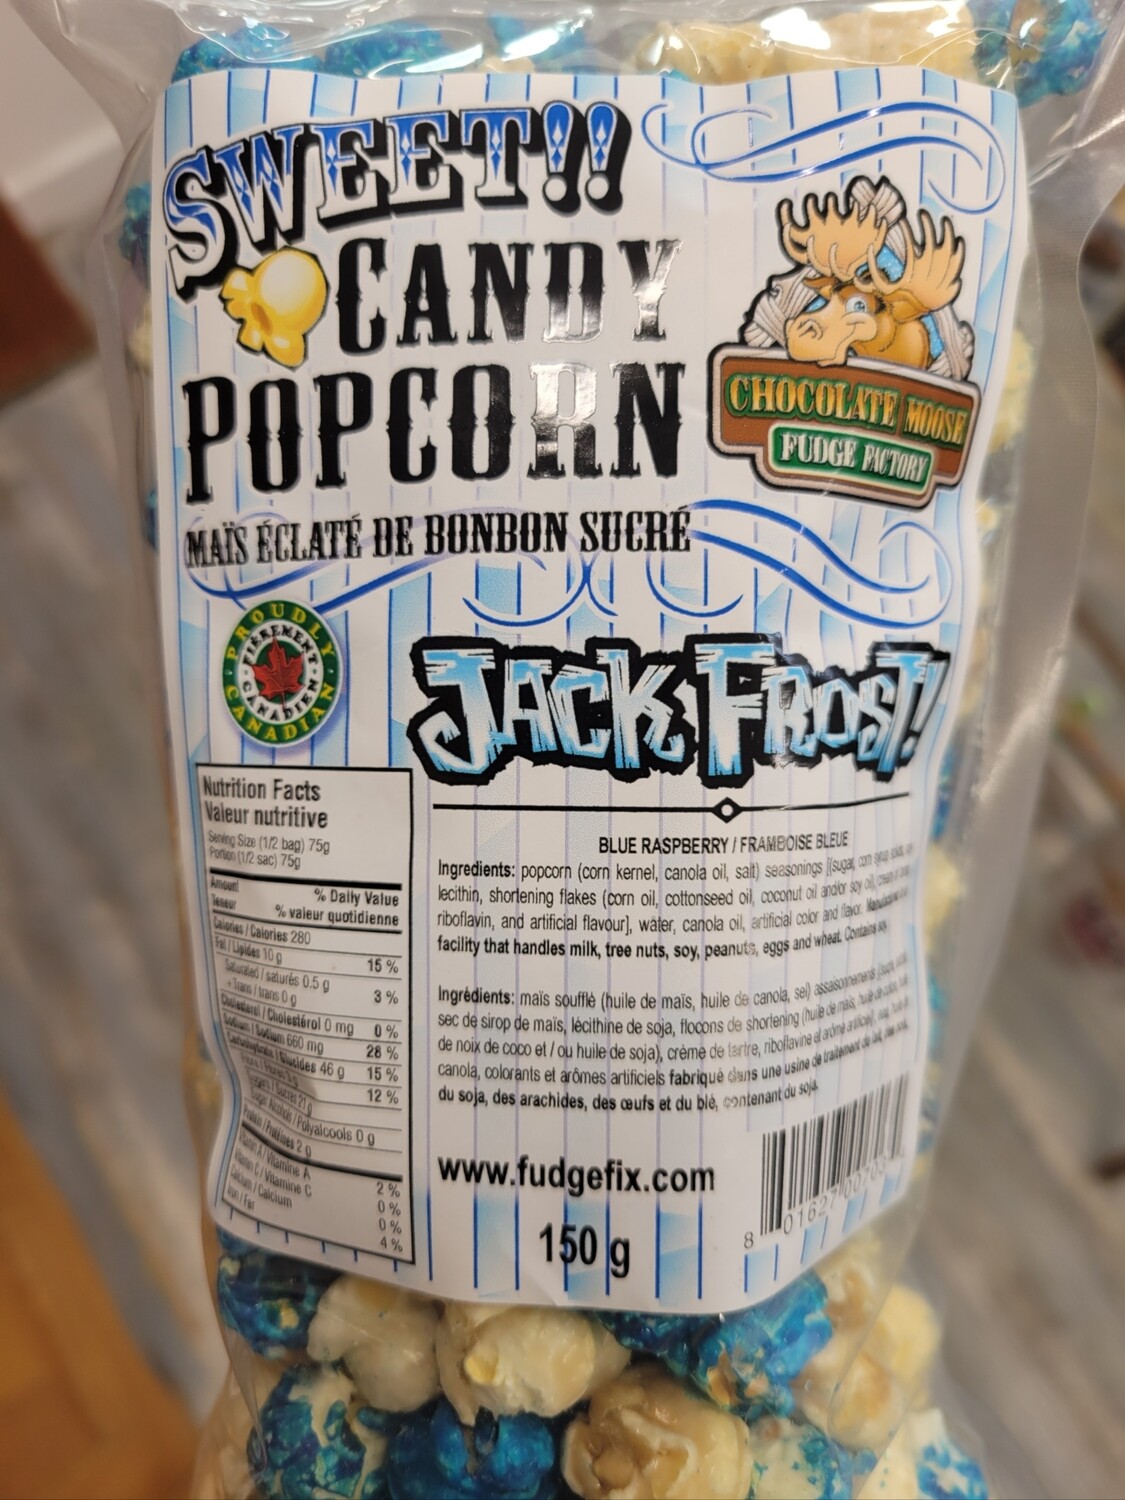 Jack Frost Candied Popcorn